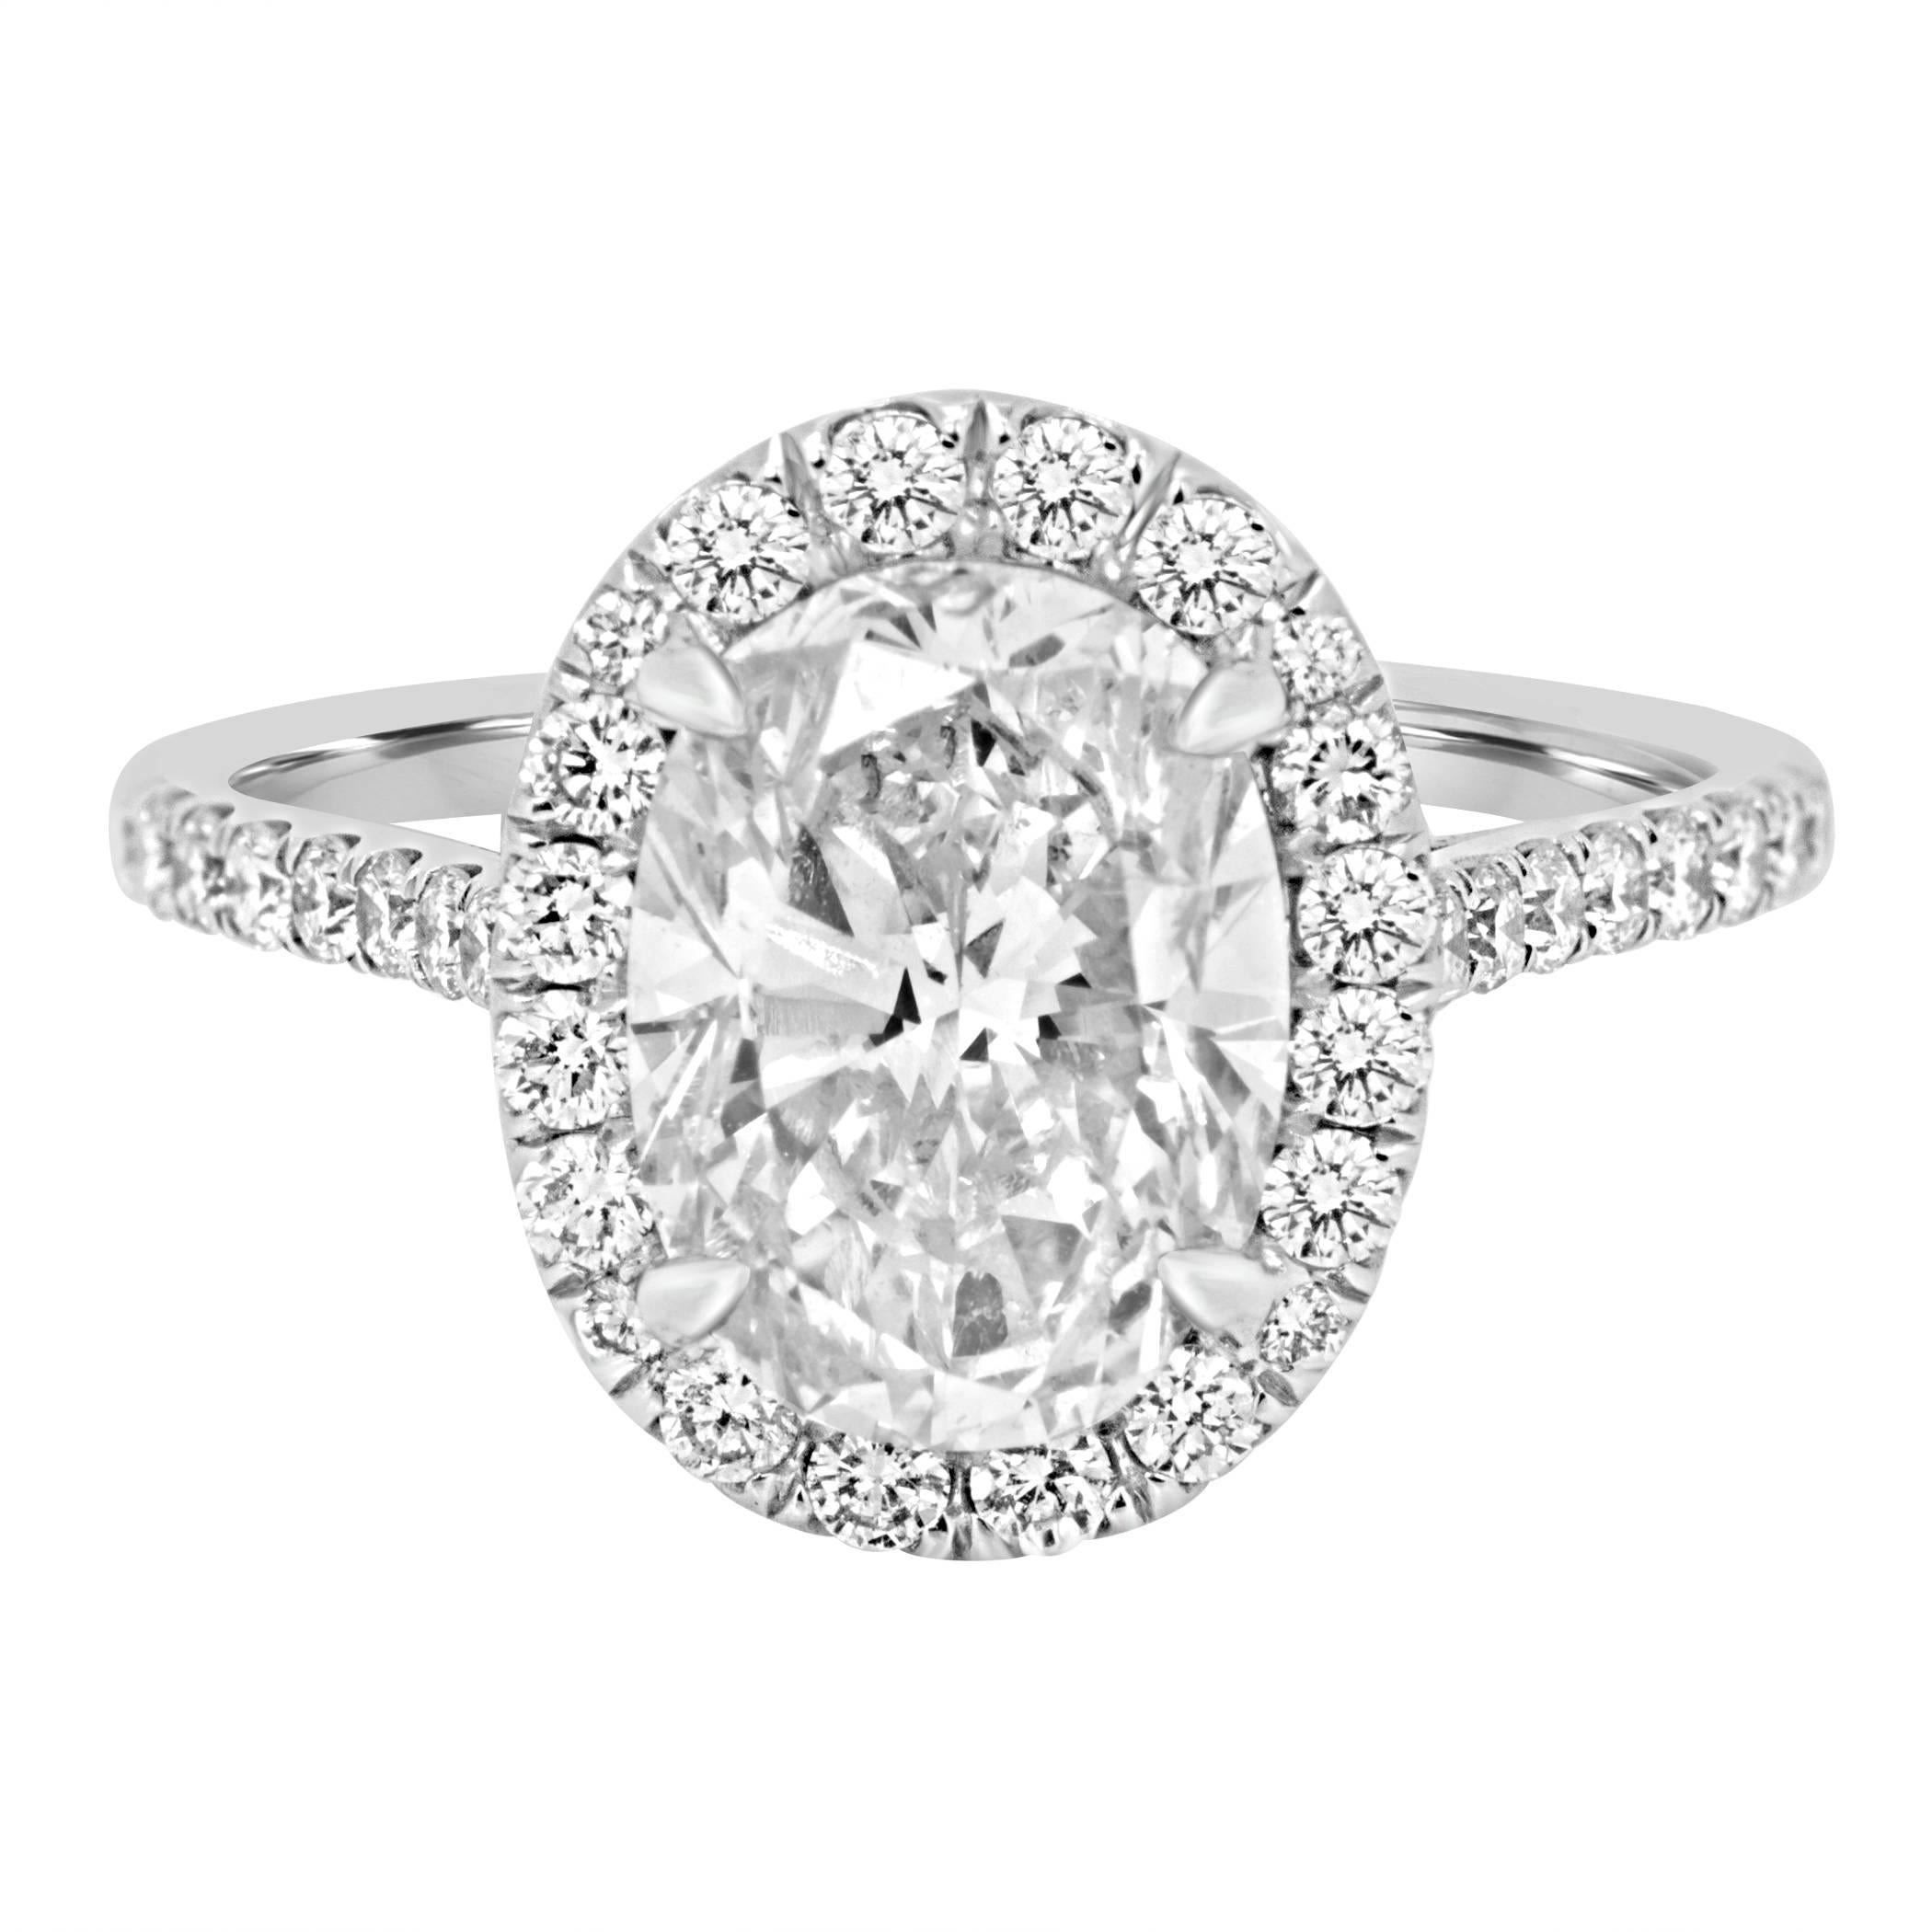 Certified 2.48 Carat Oval Diamond Halo White Gold Bridal Fashion Cocktail Ring